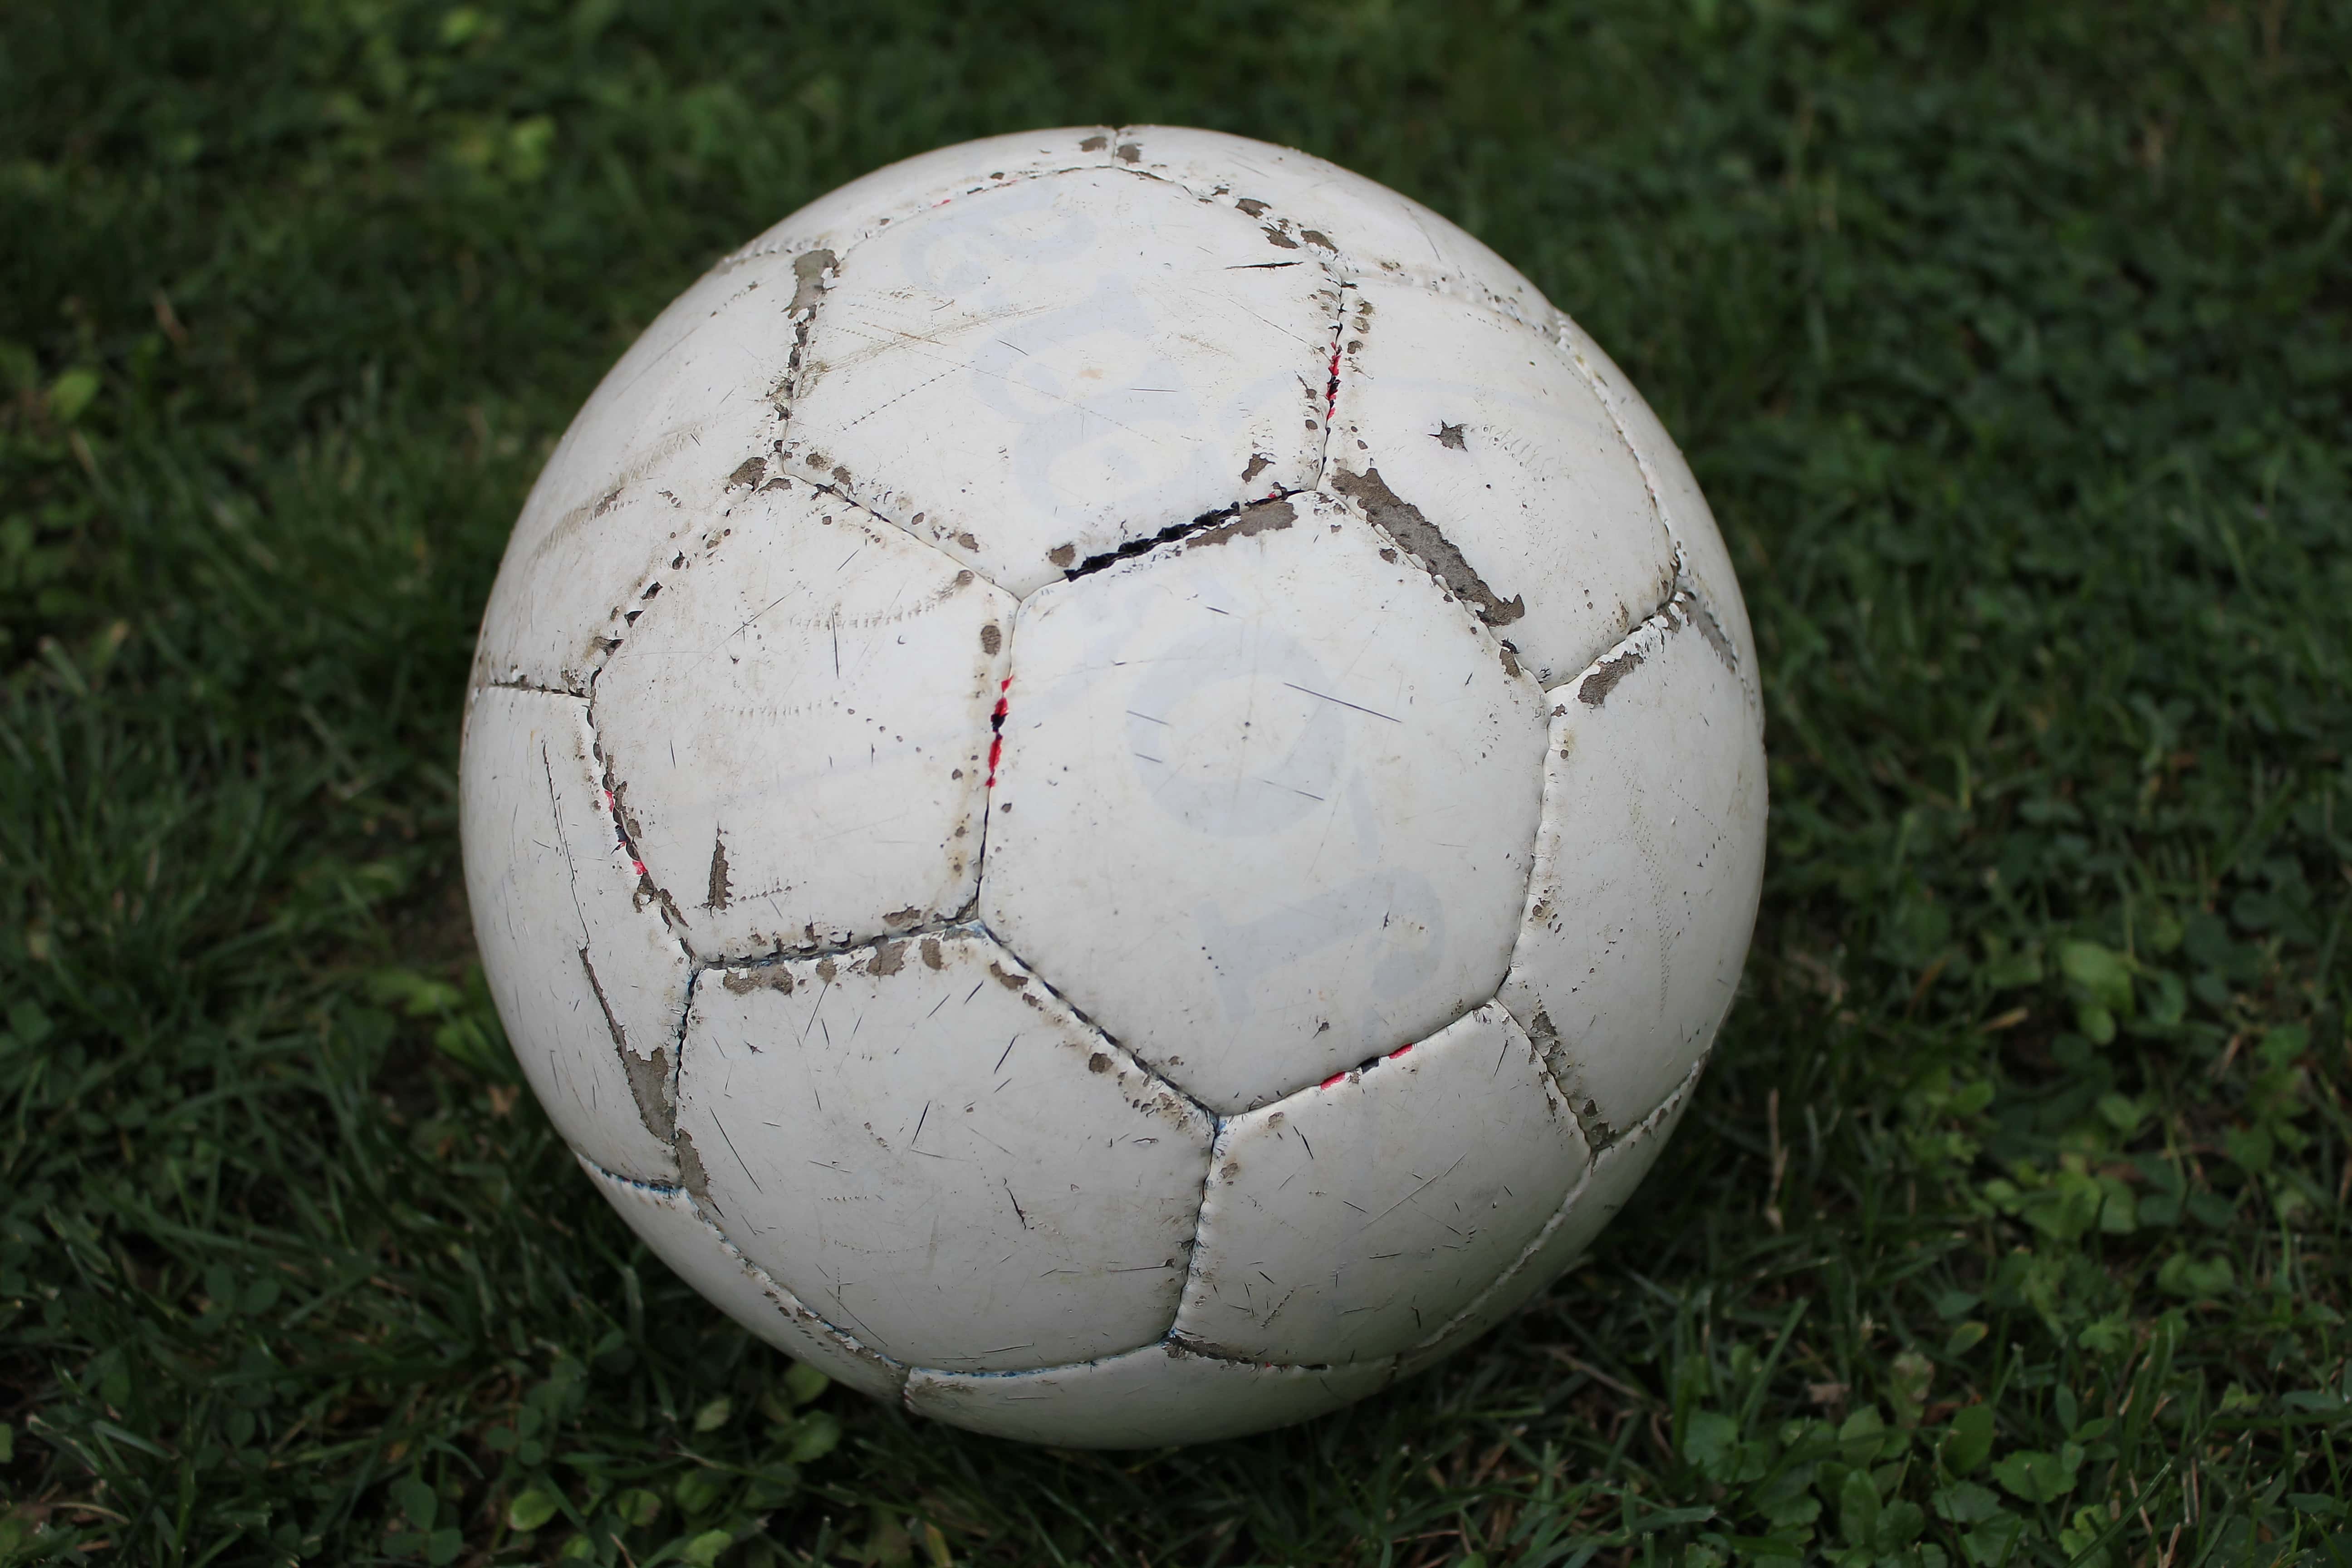 Free picture: football, ball, lawn, soccer, grass, leather, game, sport, equipment, soccer ball